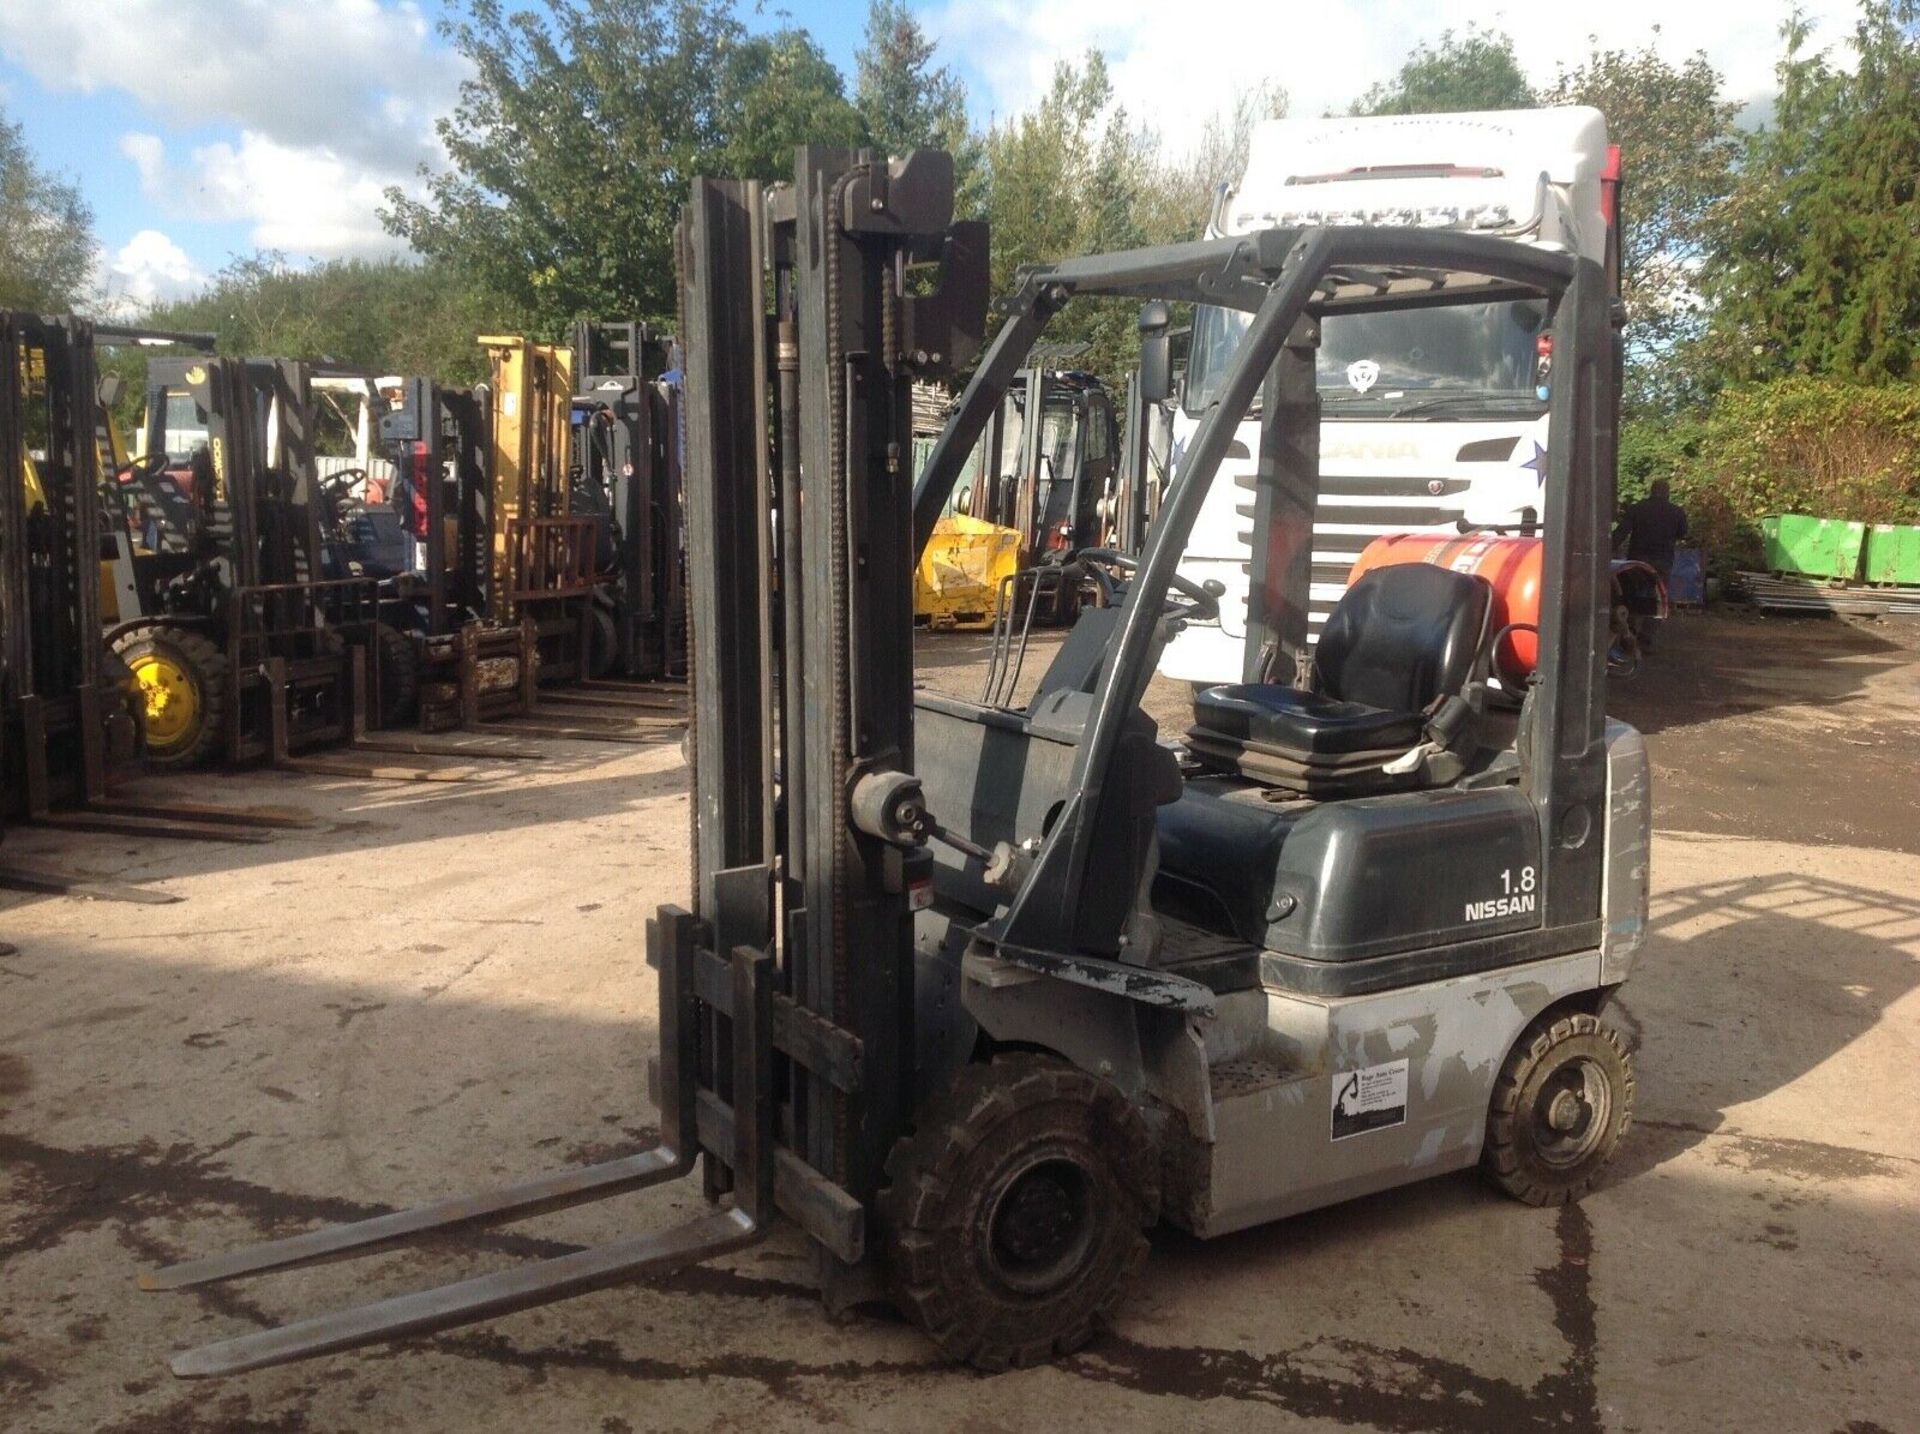 Nissan 1.8 ton gas forklift - Image 3 of 5